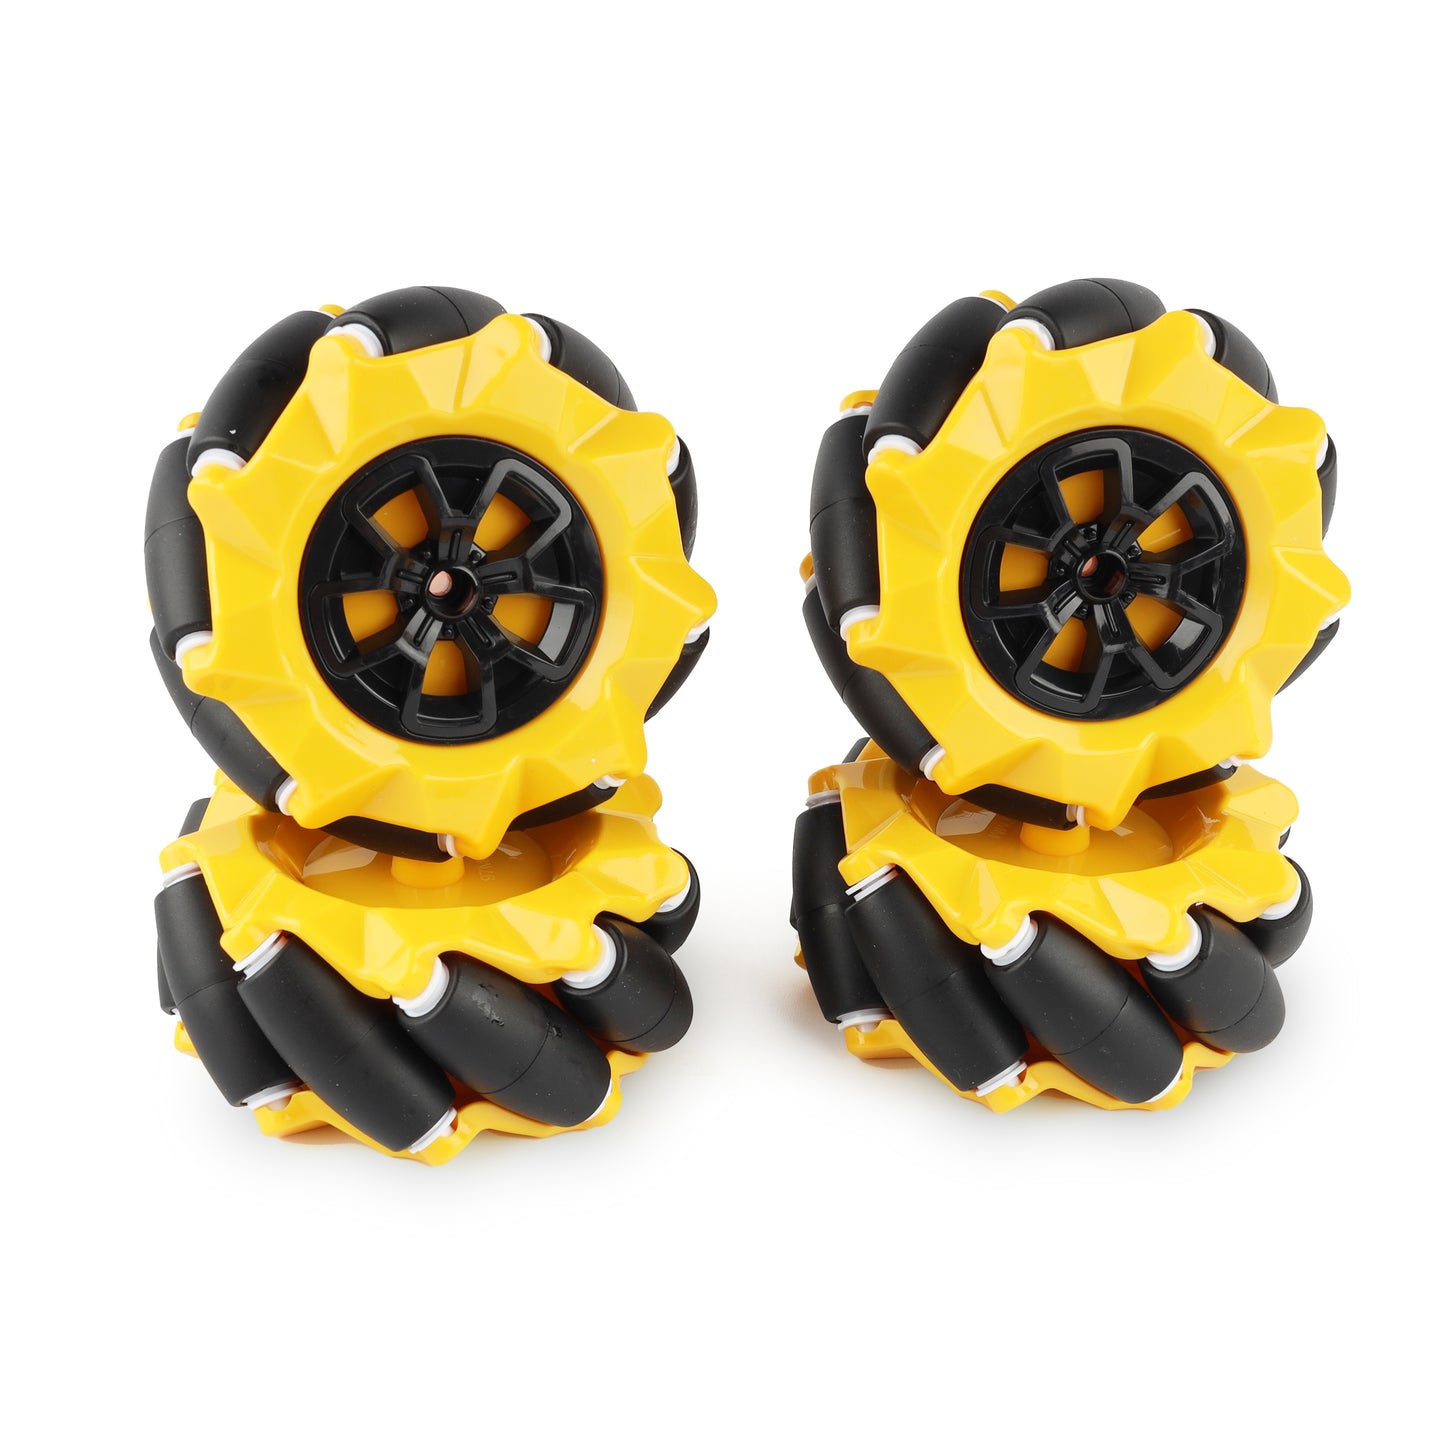 YFROBOT Plastic Mecanum Wheels, 97mm in size, come in a set of four with couplings included